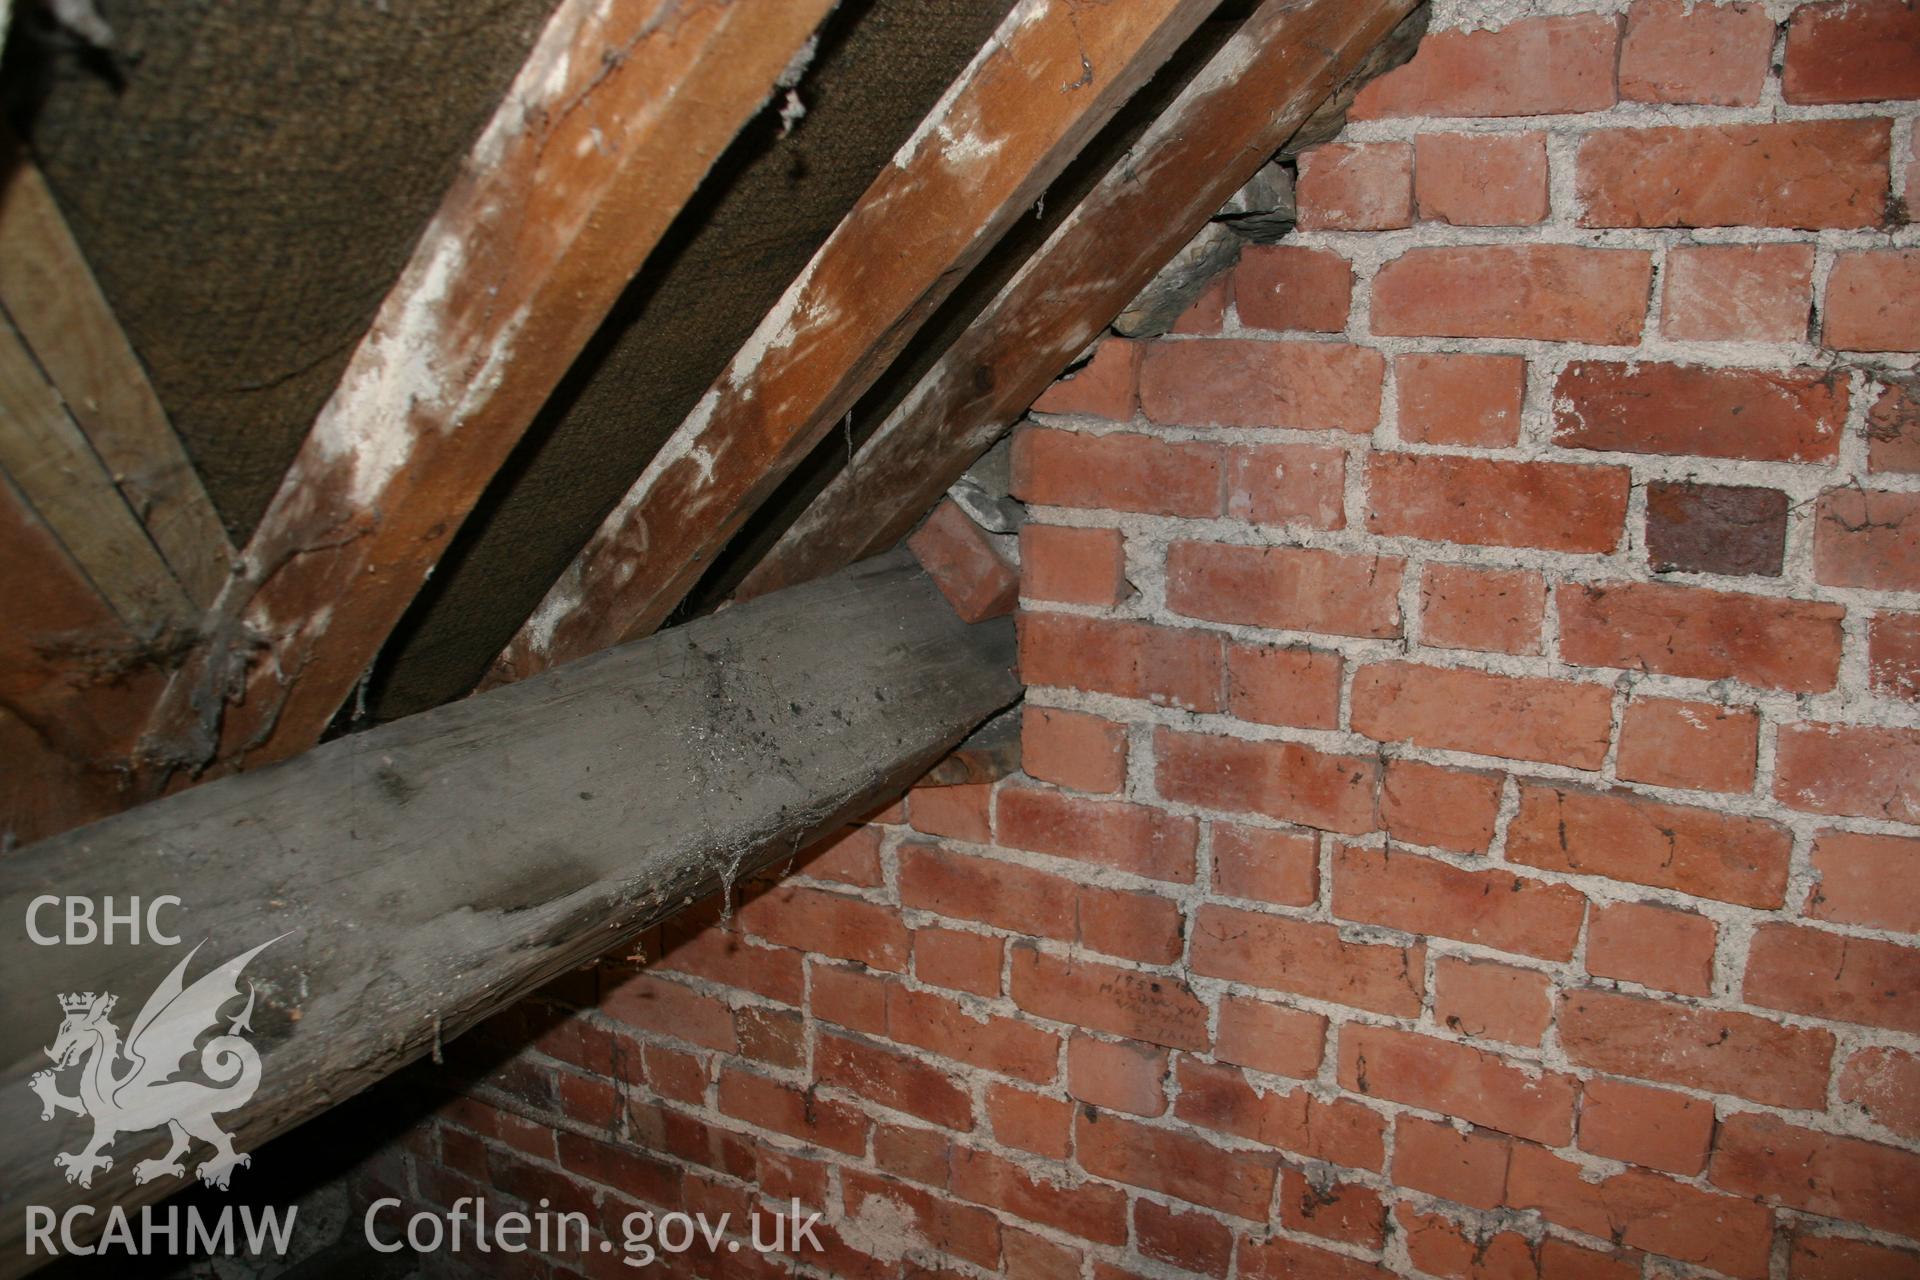 Photograph showing detailed interior view of brick wall, wooden beams and roof of former Llawrybettws Welsh Calvinistic Methodist chapel, Glanyrafon, Corwen. Produced by Tim Allen on 27th February 2019 to meet a condition attached to planning application.